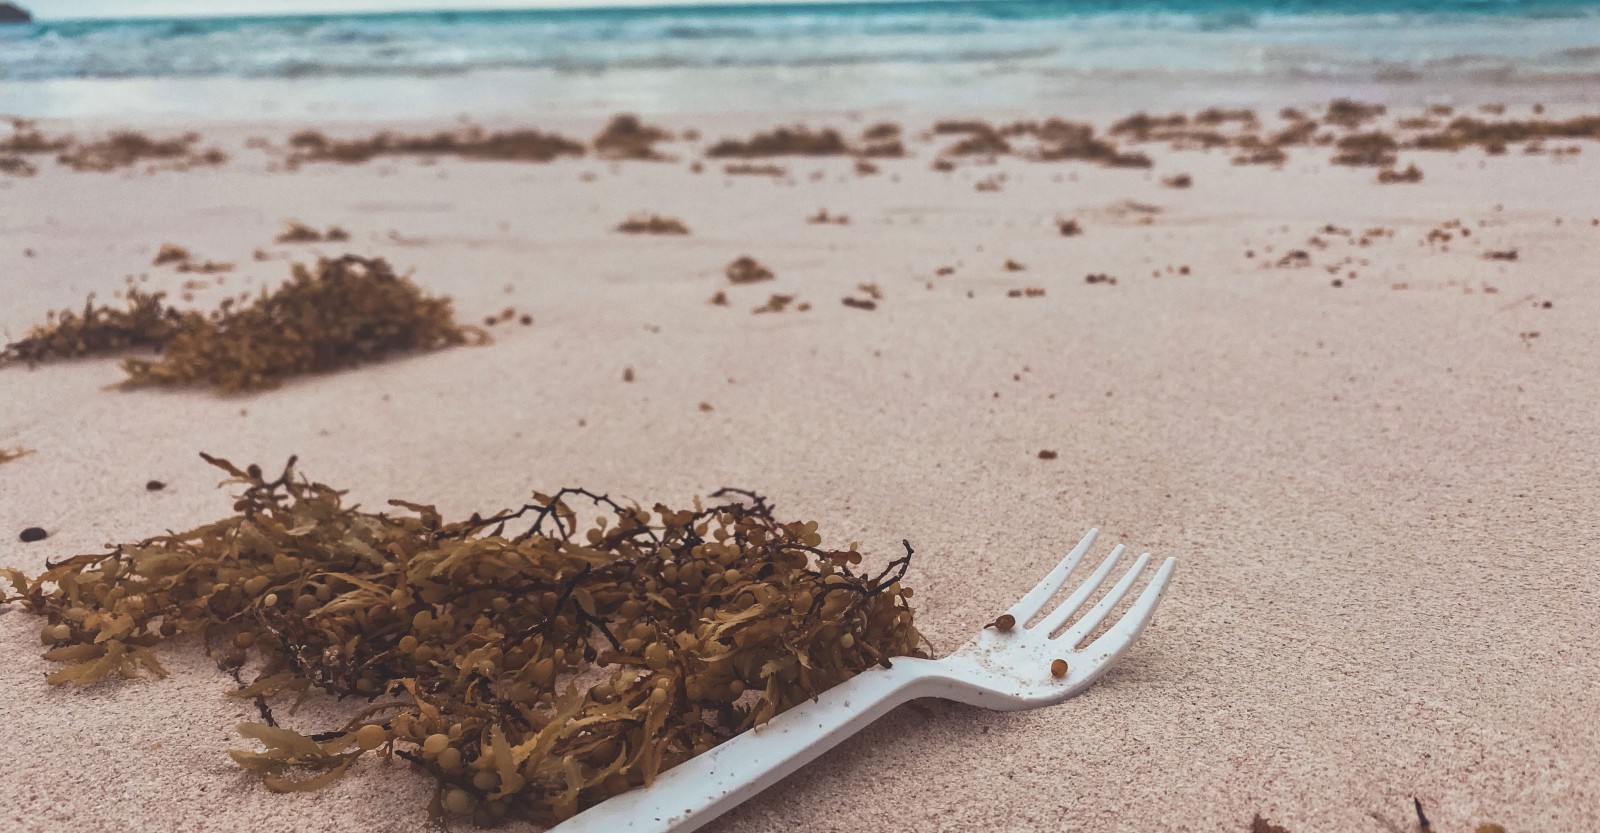 Plastic fork in the sand with seaweed